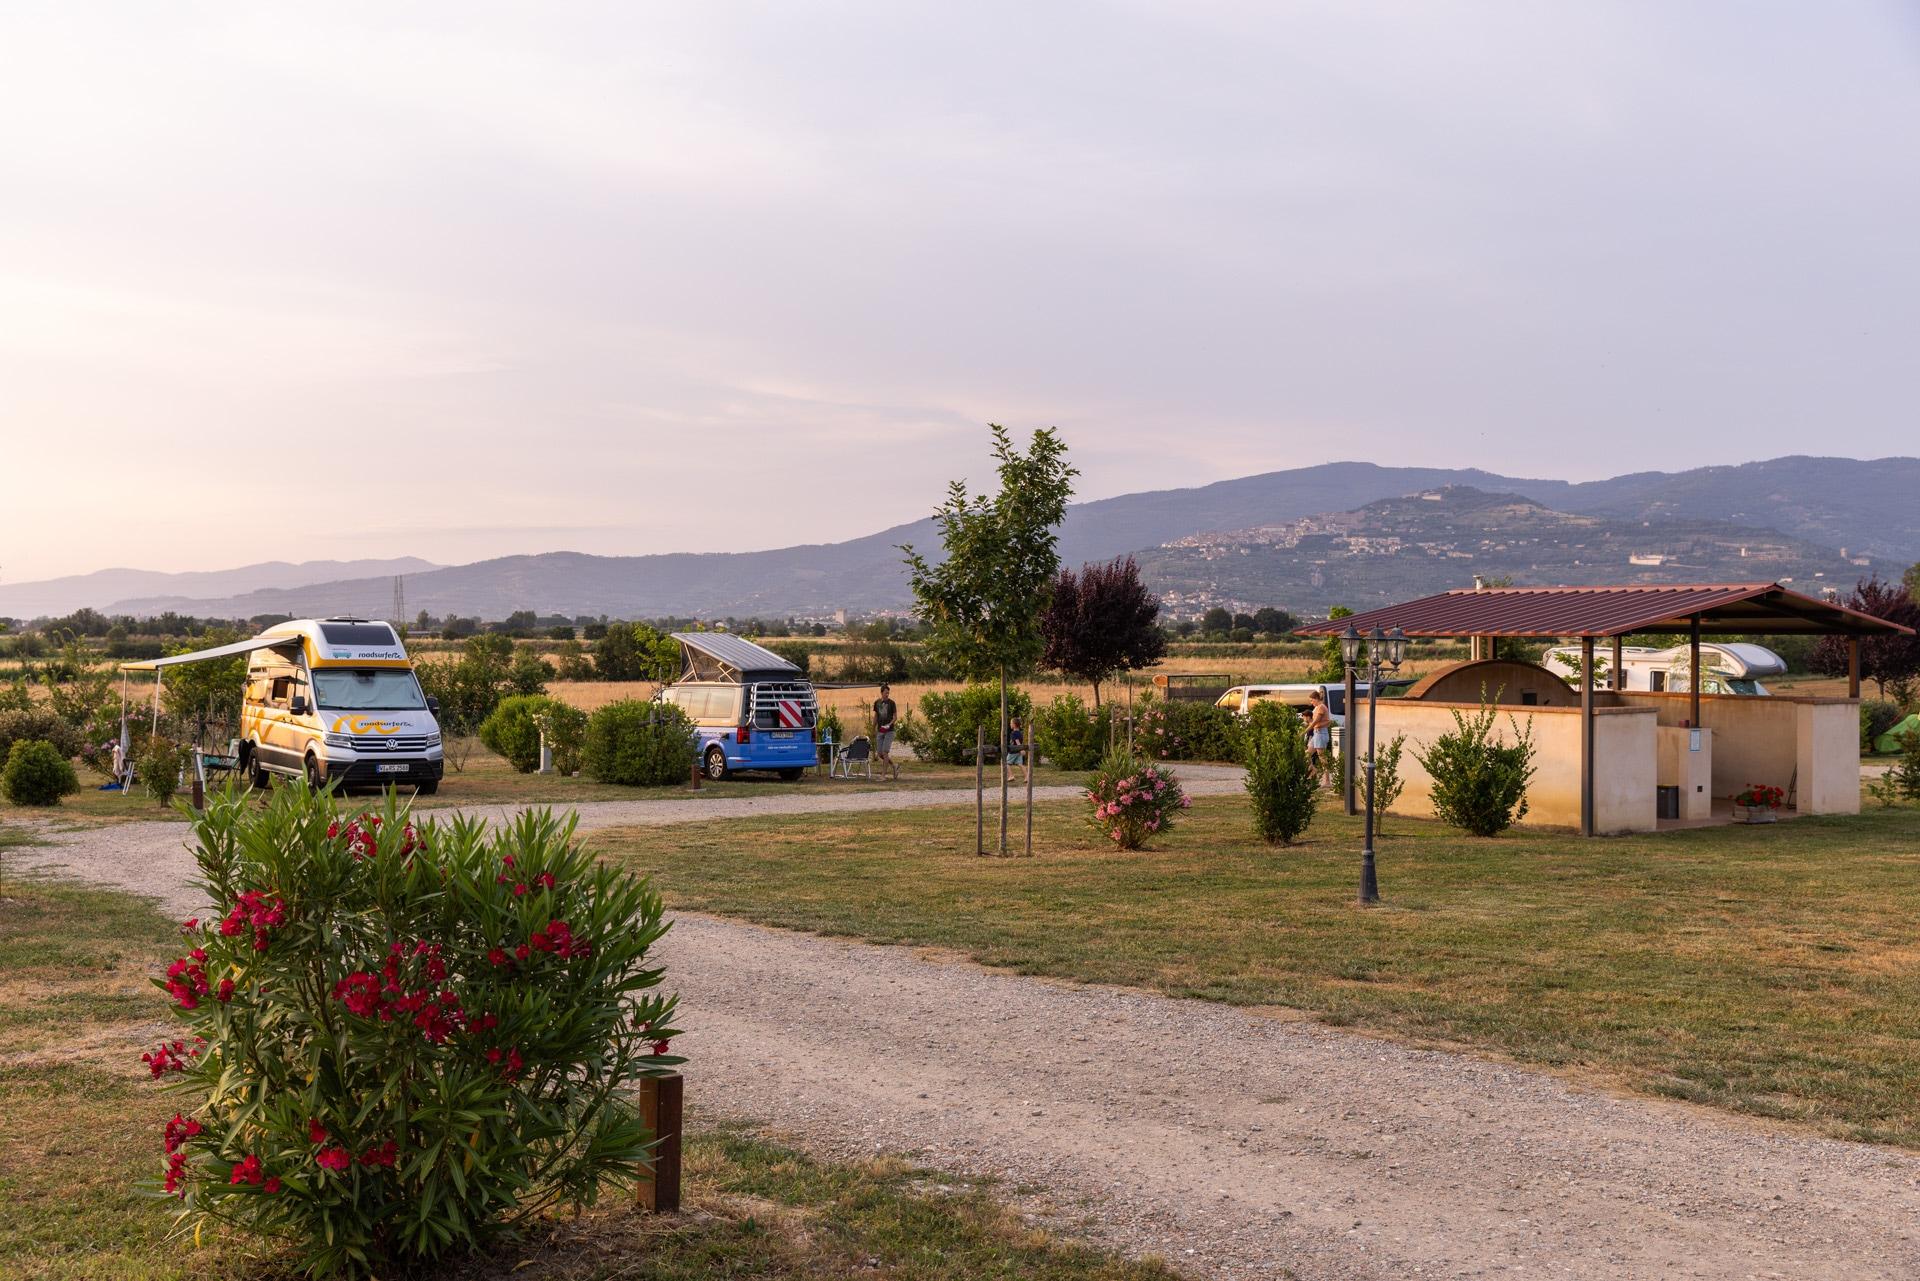 Parking areas for campers, trailers and caravans. Campsite in Cortona, Tuscany